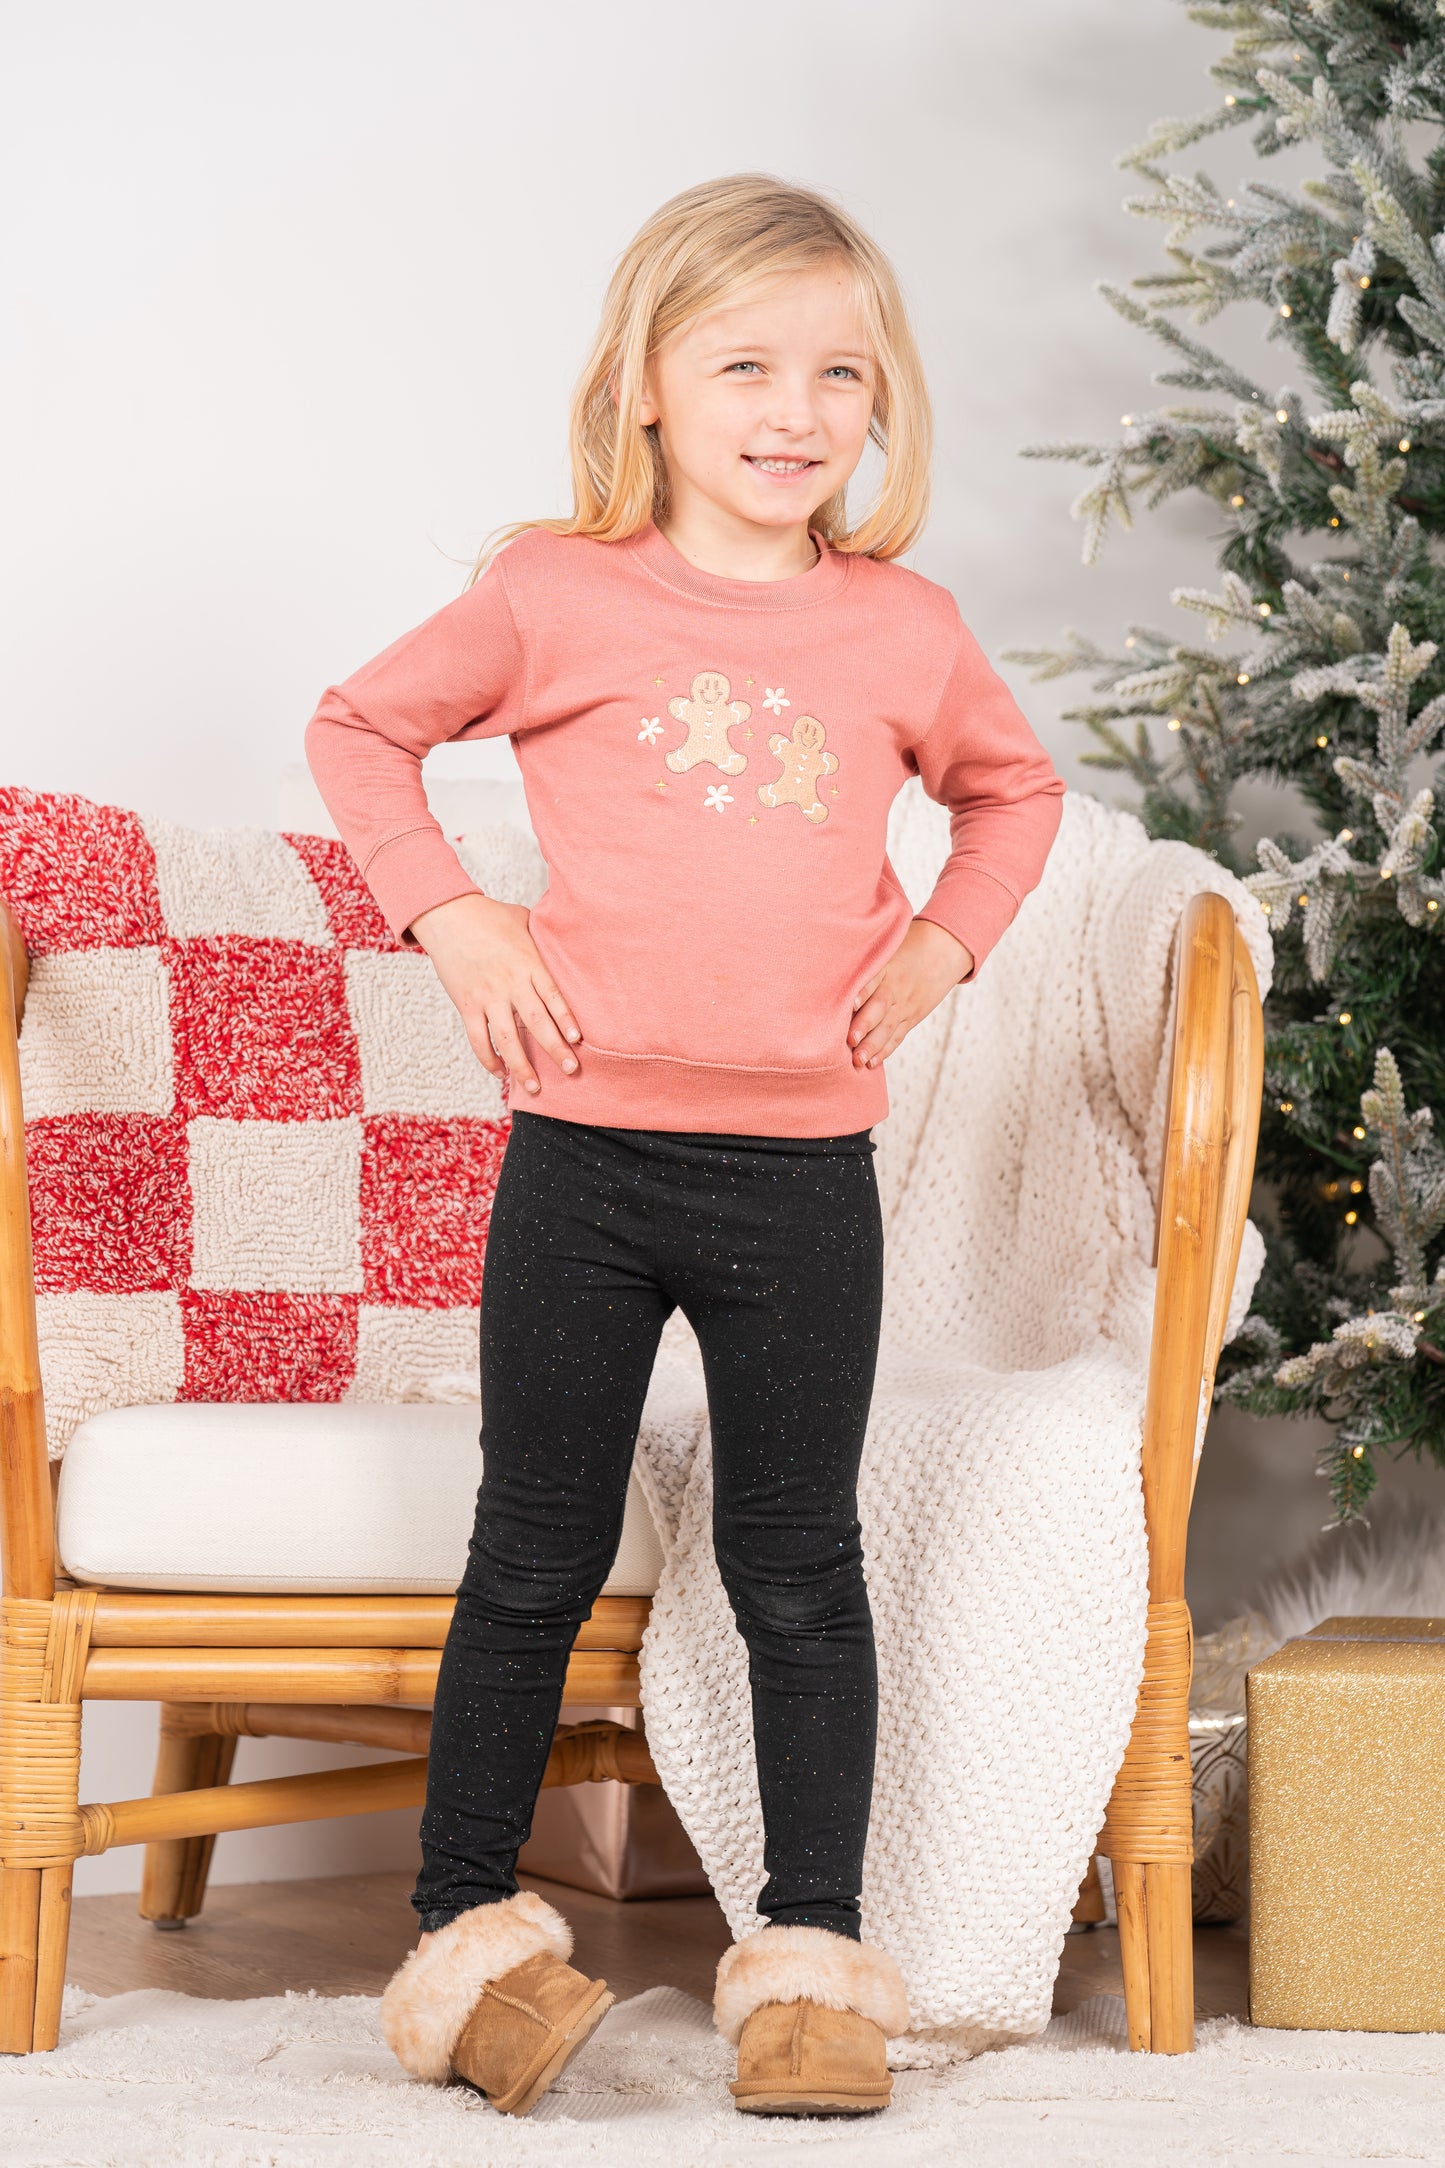 Daisy Gingerbread Cookies - Embroidered Kids Sweatshirt (Mauve)